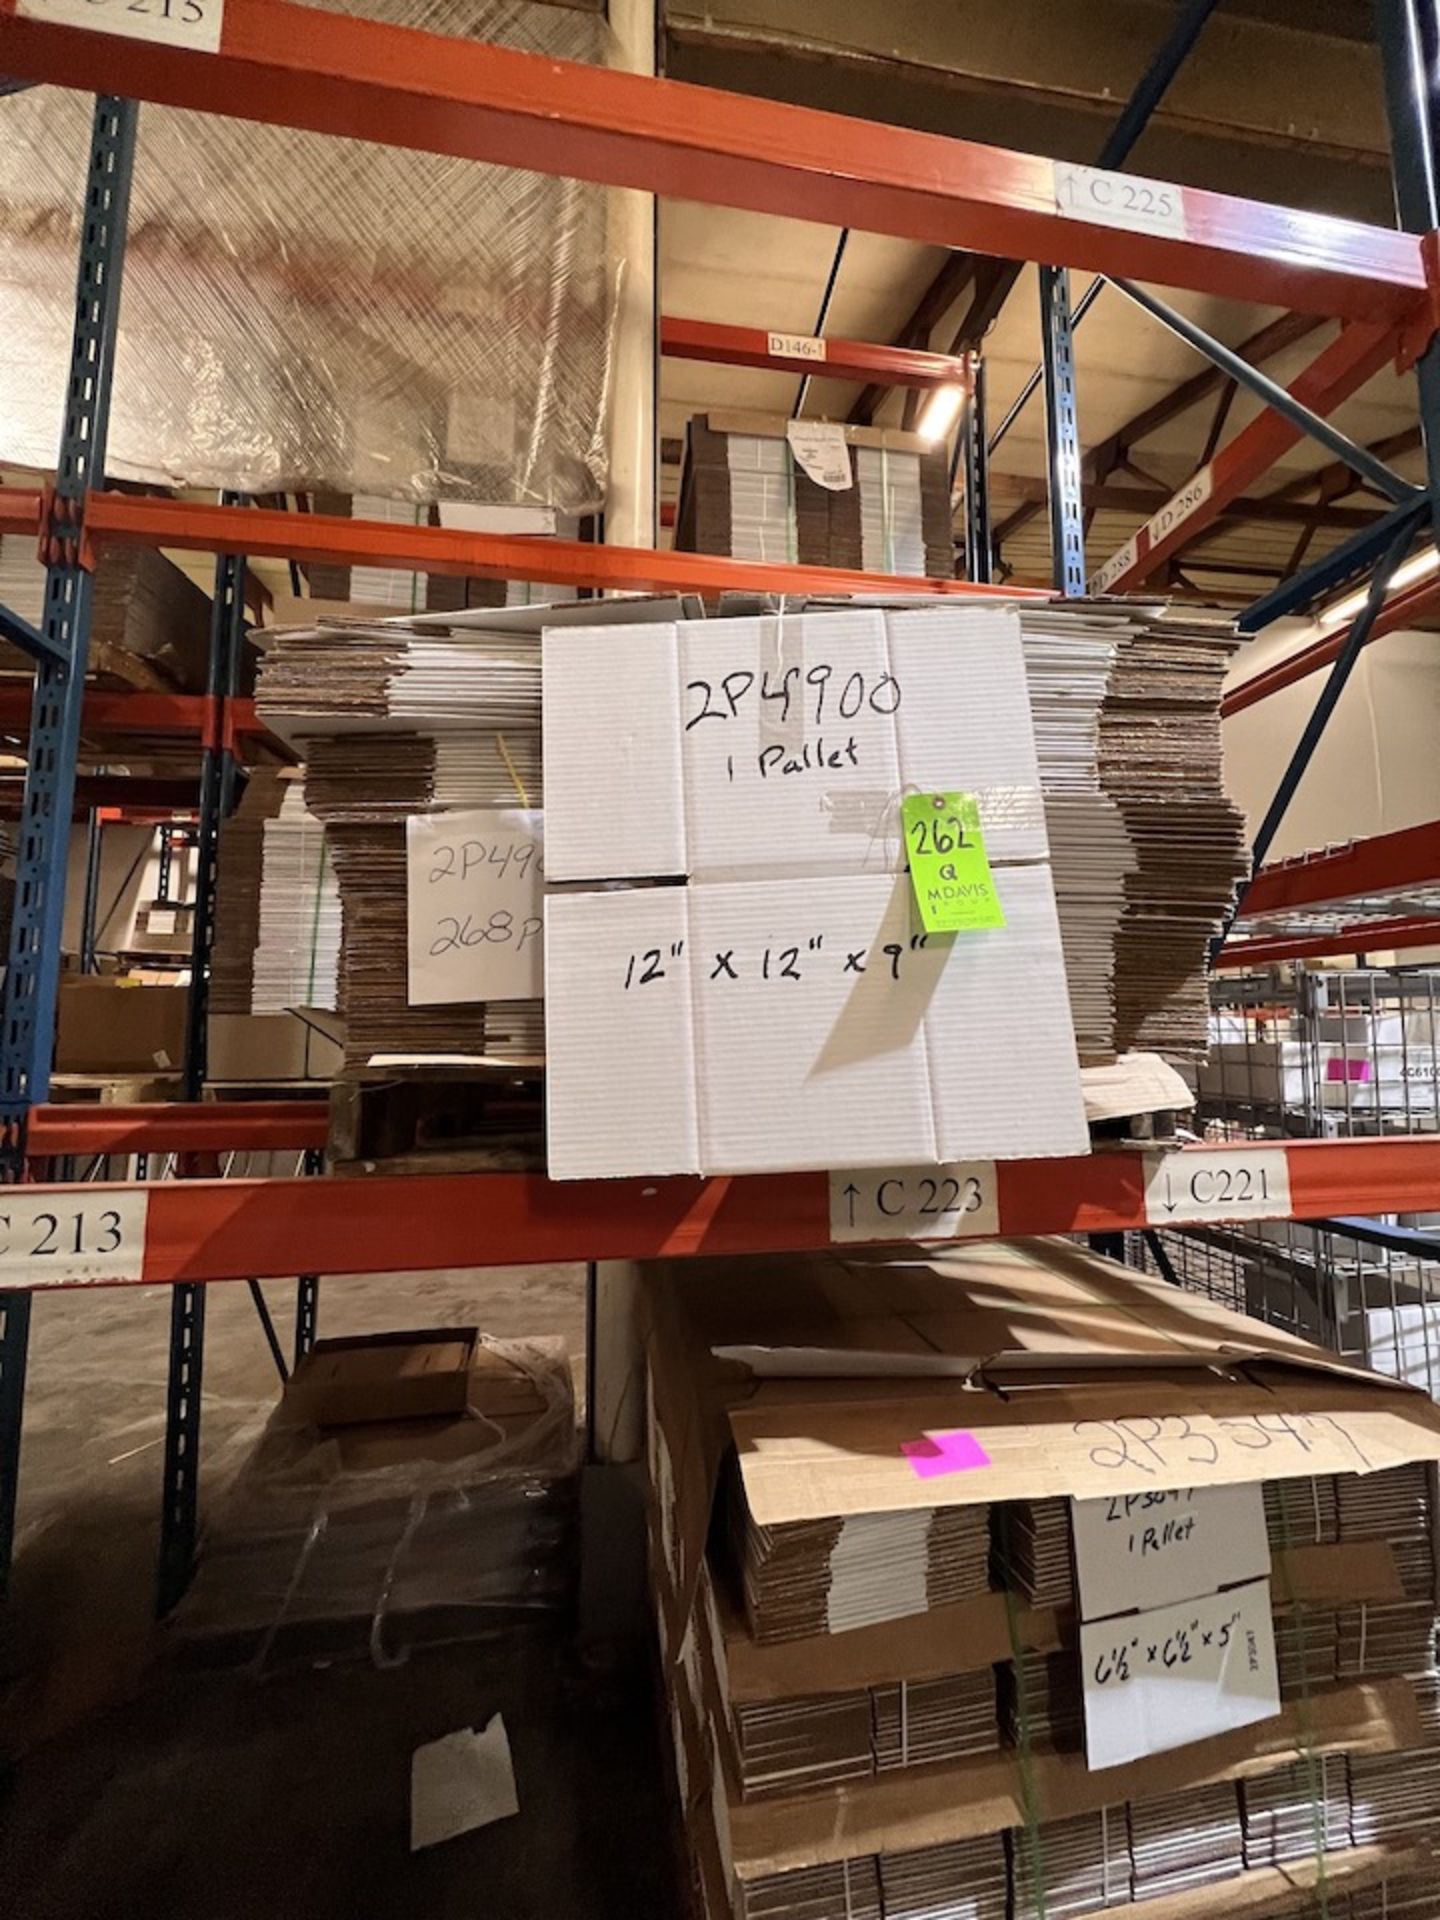 (1) PALLET OF CORRUGATED CARDBOARD BOXES, 12 IN. X 12 IN. X 9 IN. LWH (LOADING FEE:  $20.00 USD) (